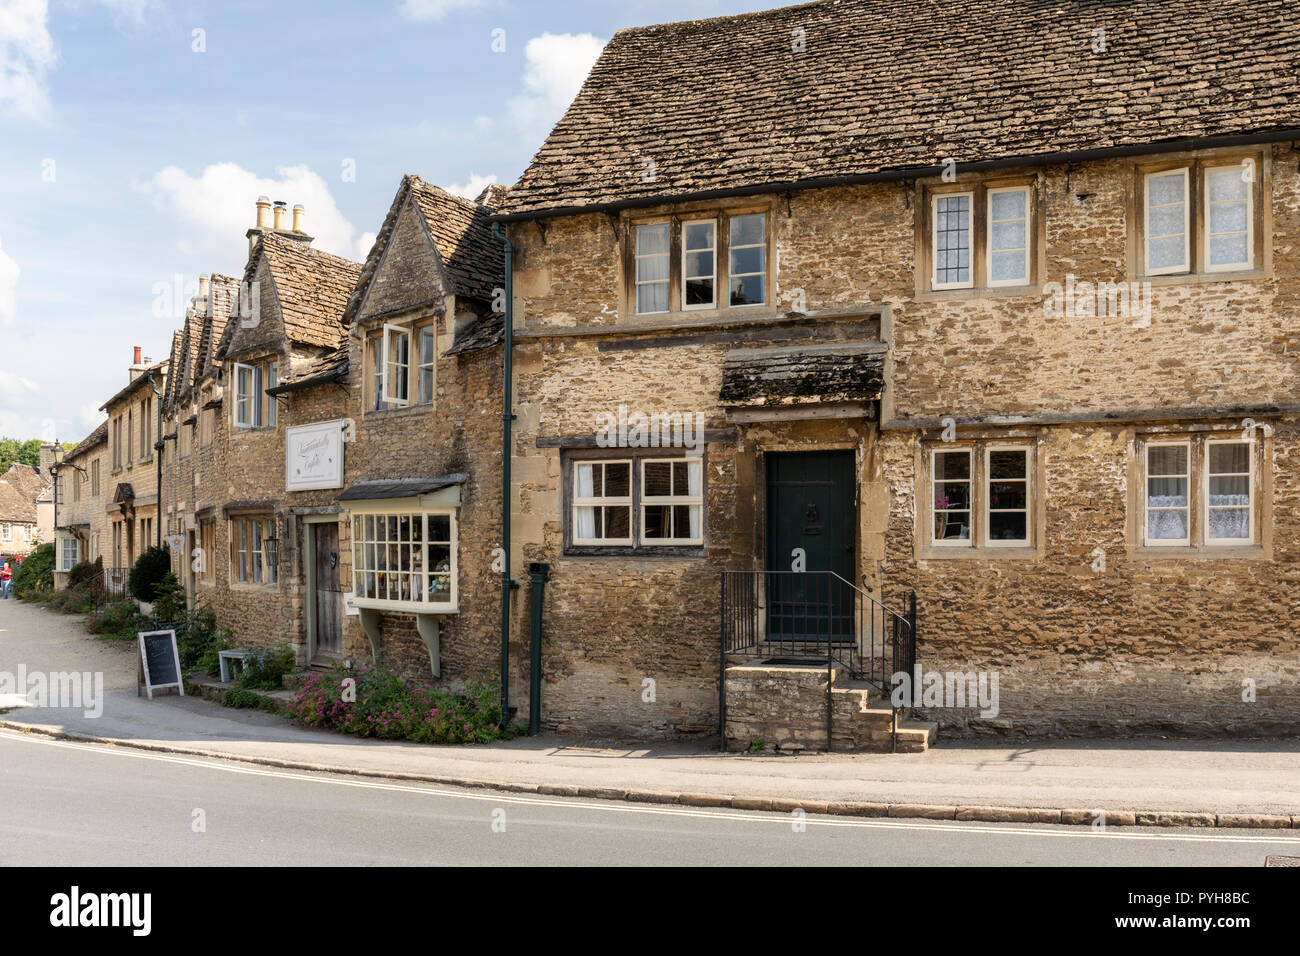 Picturesque West Street in the Wiltshire village of Lacock, England, UK Stock Photo